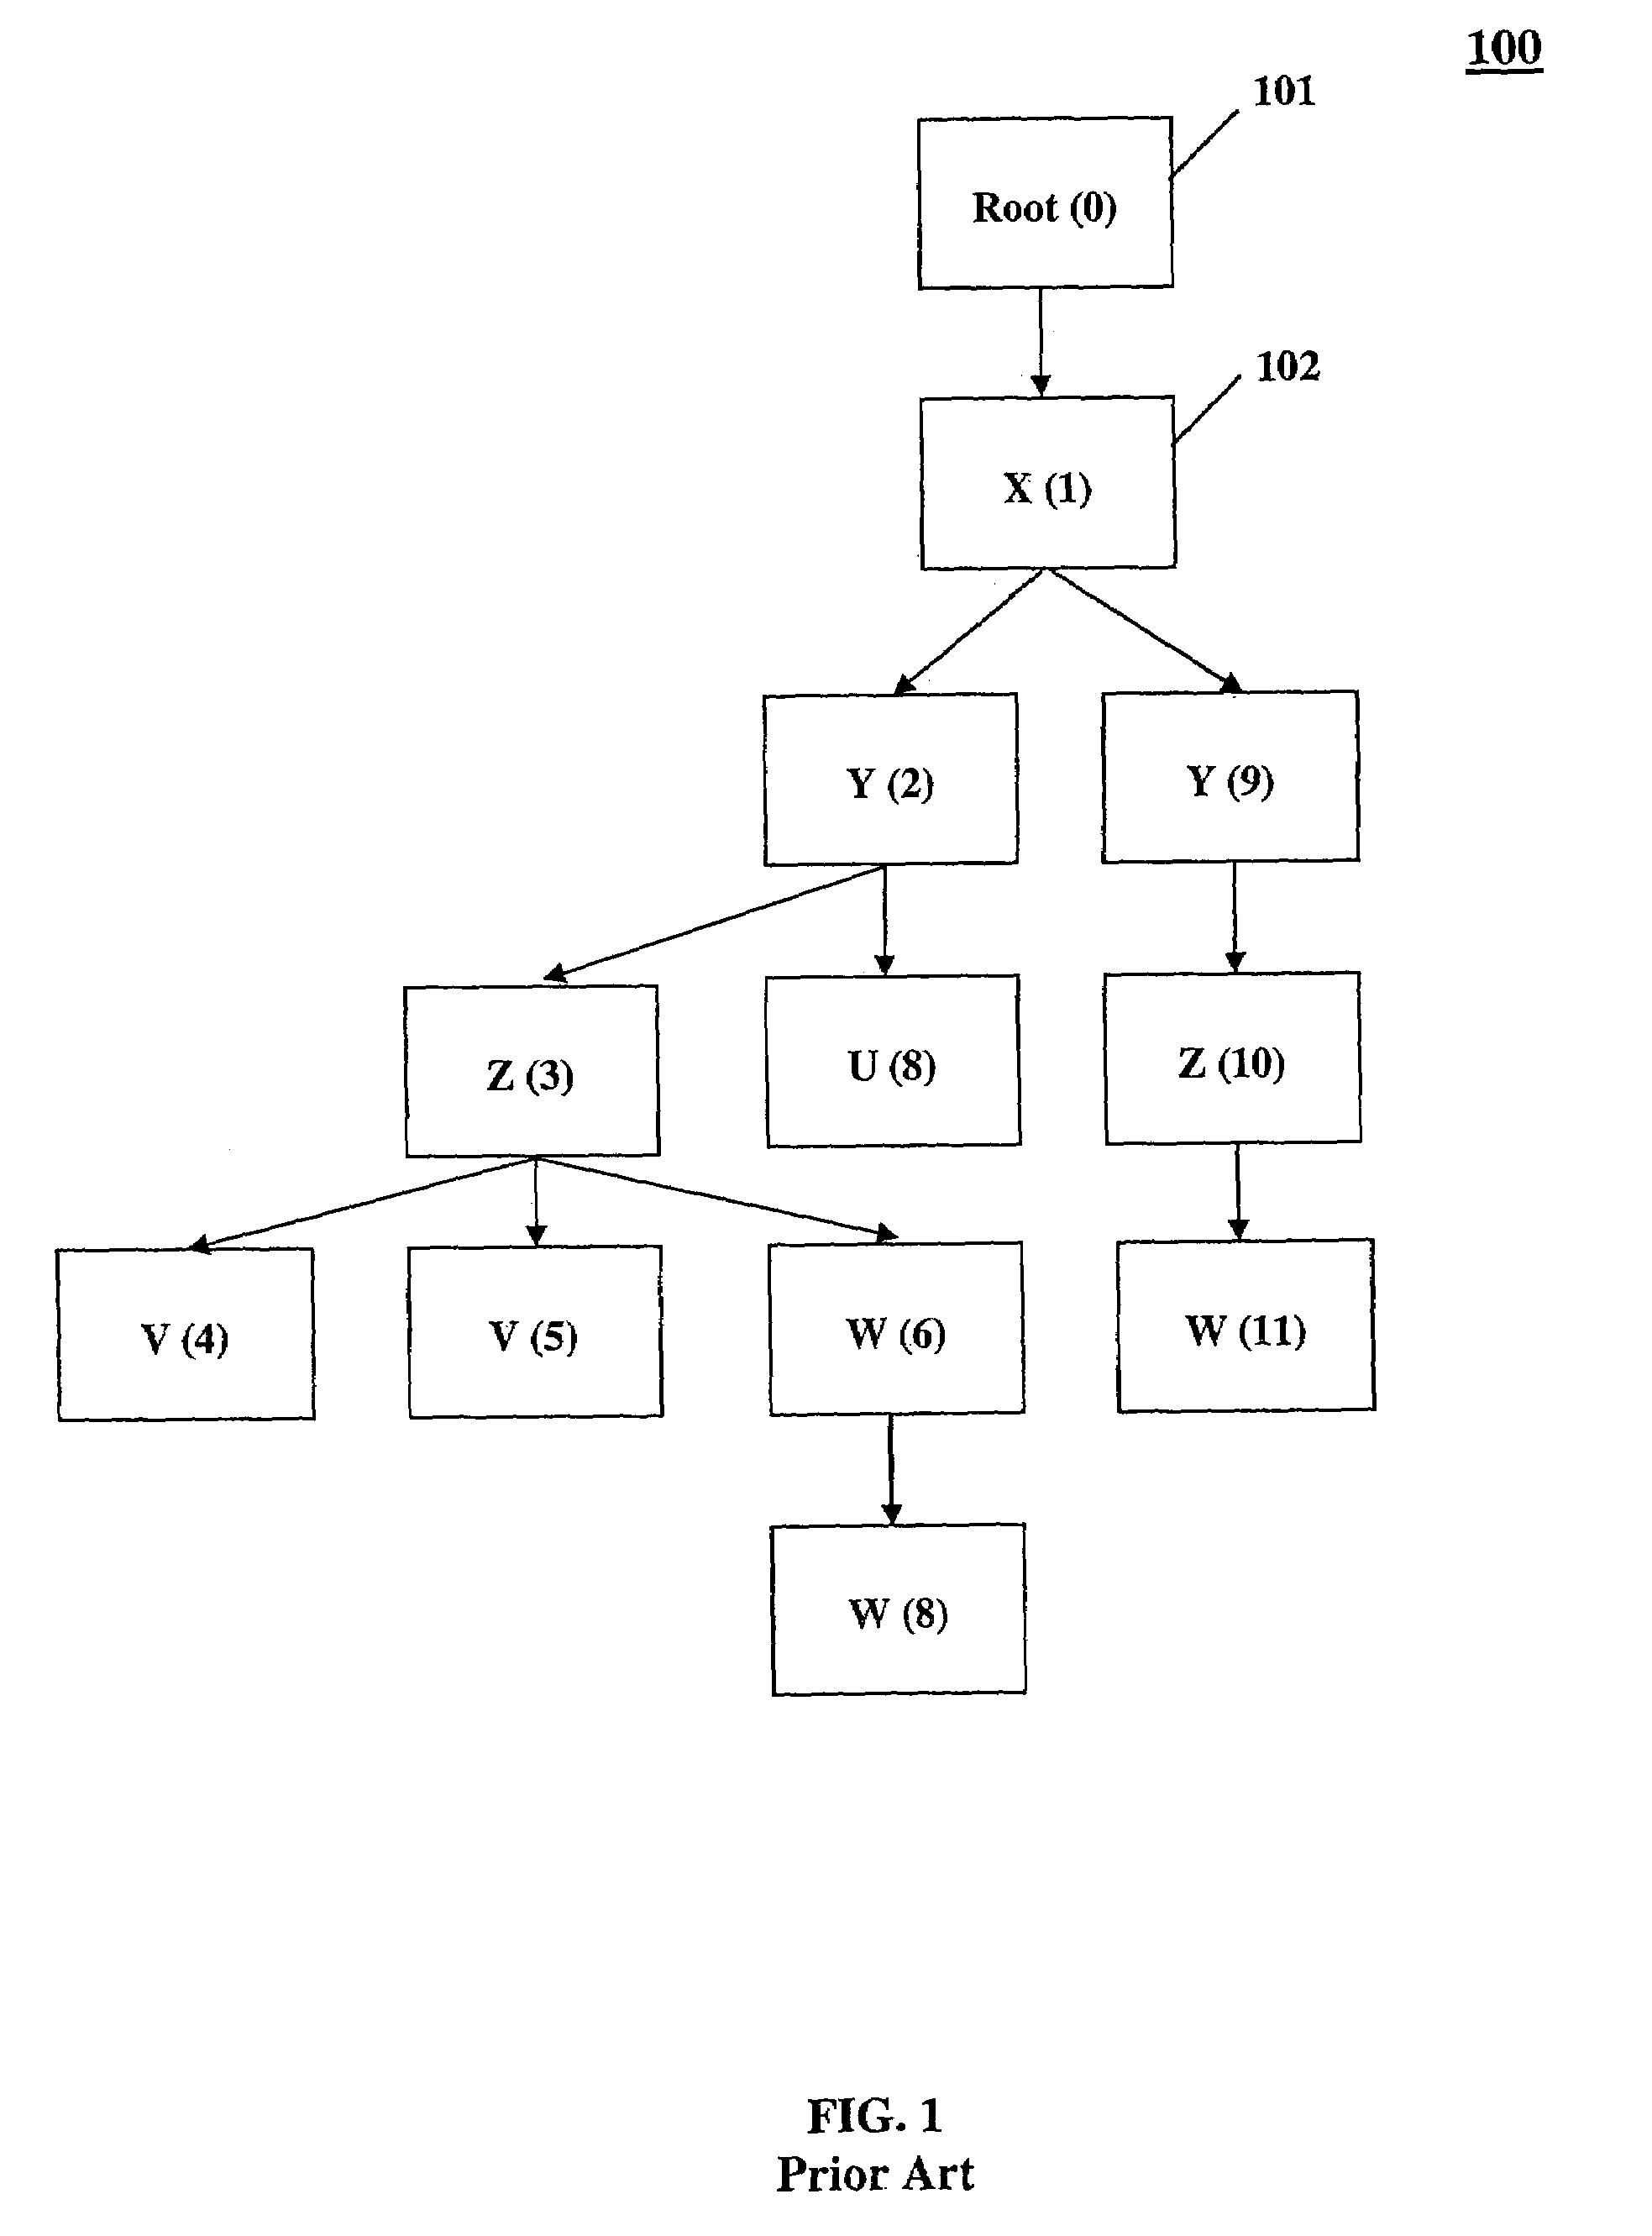 Method for streaming XPath processing with forward and backward axes